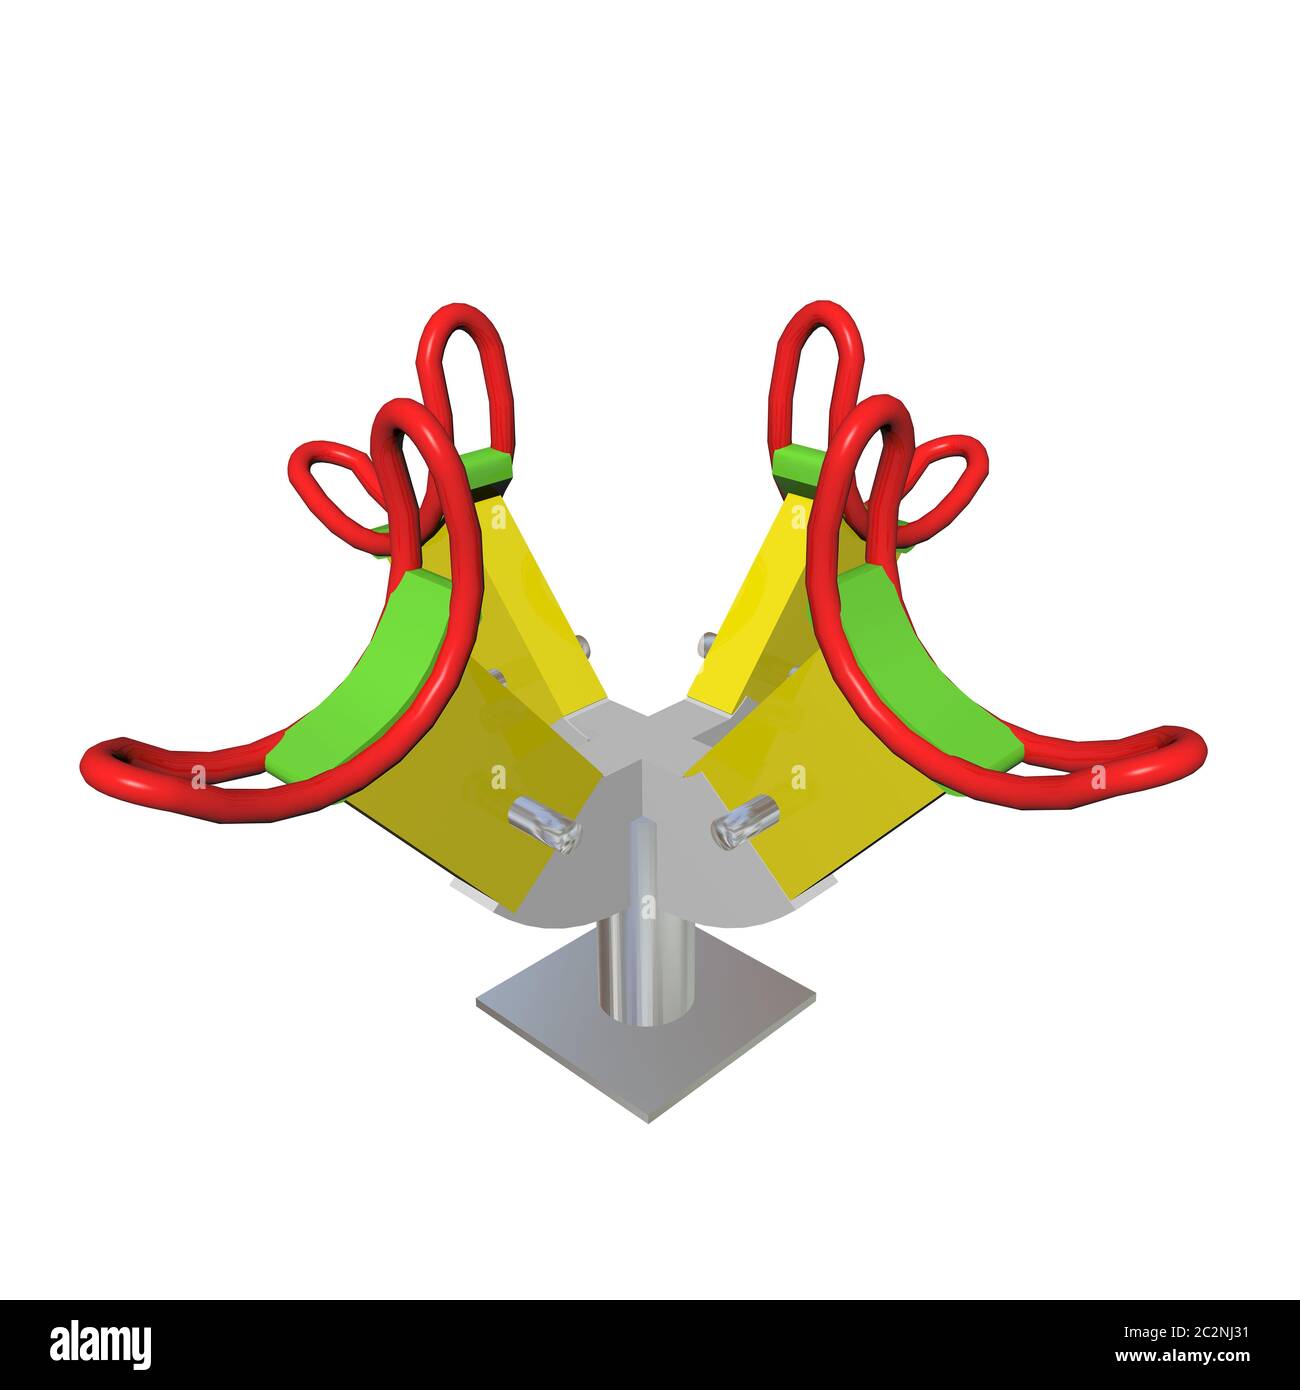 Red, green and yellow four-person children see-saw, 3D illustration, isolated against a white background Stock Photo